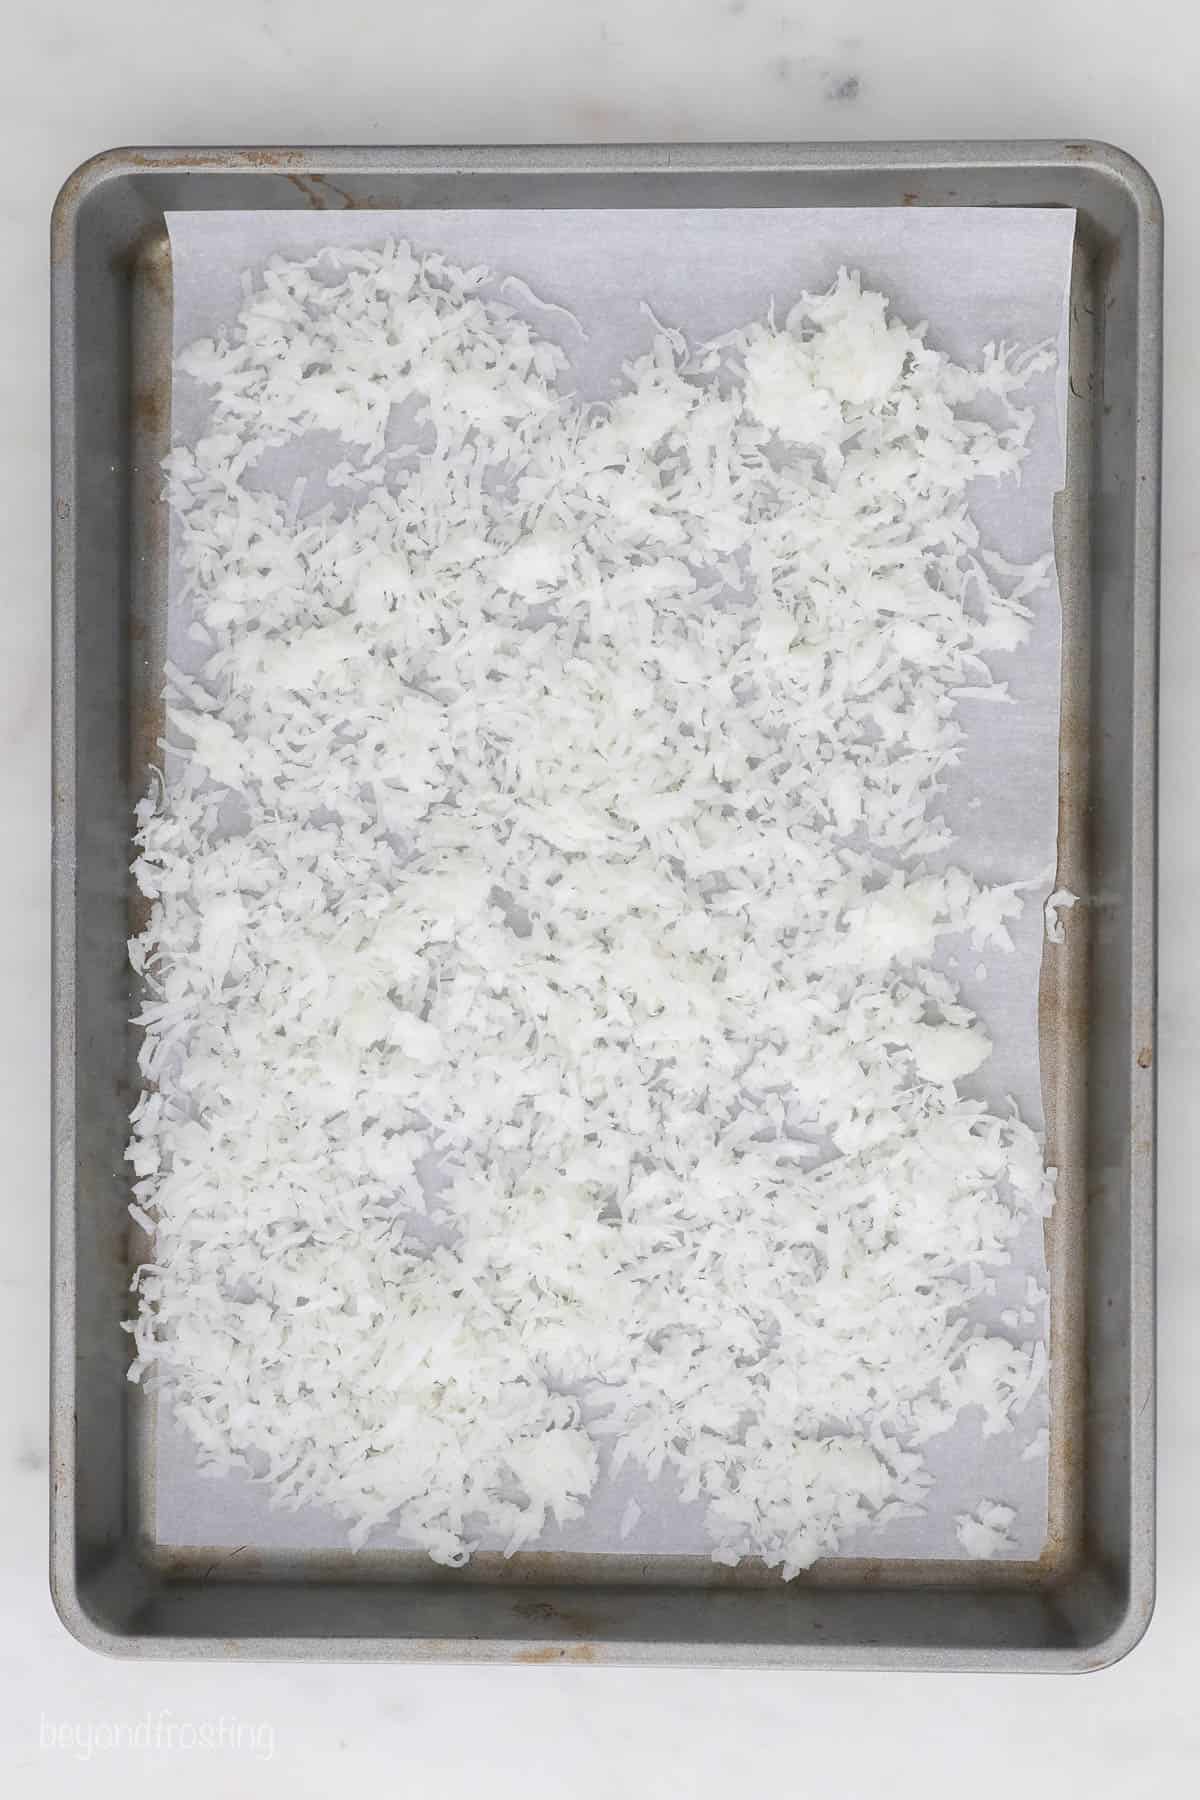 Coconut flakes spread on a baking sheet